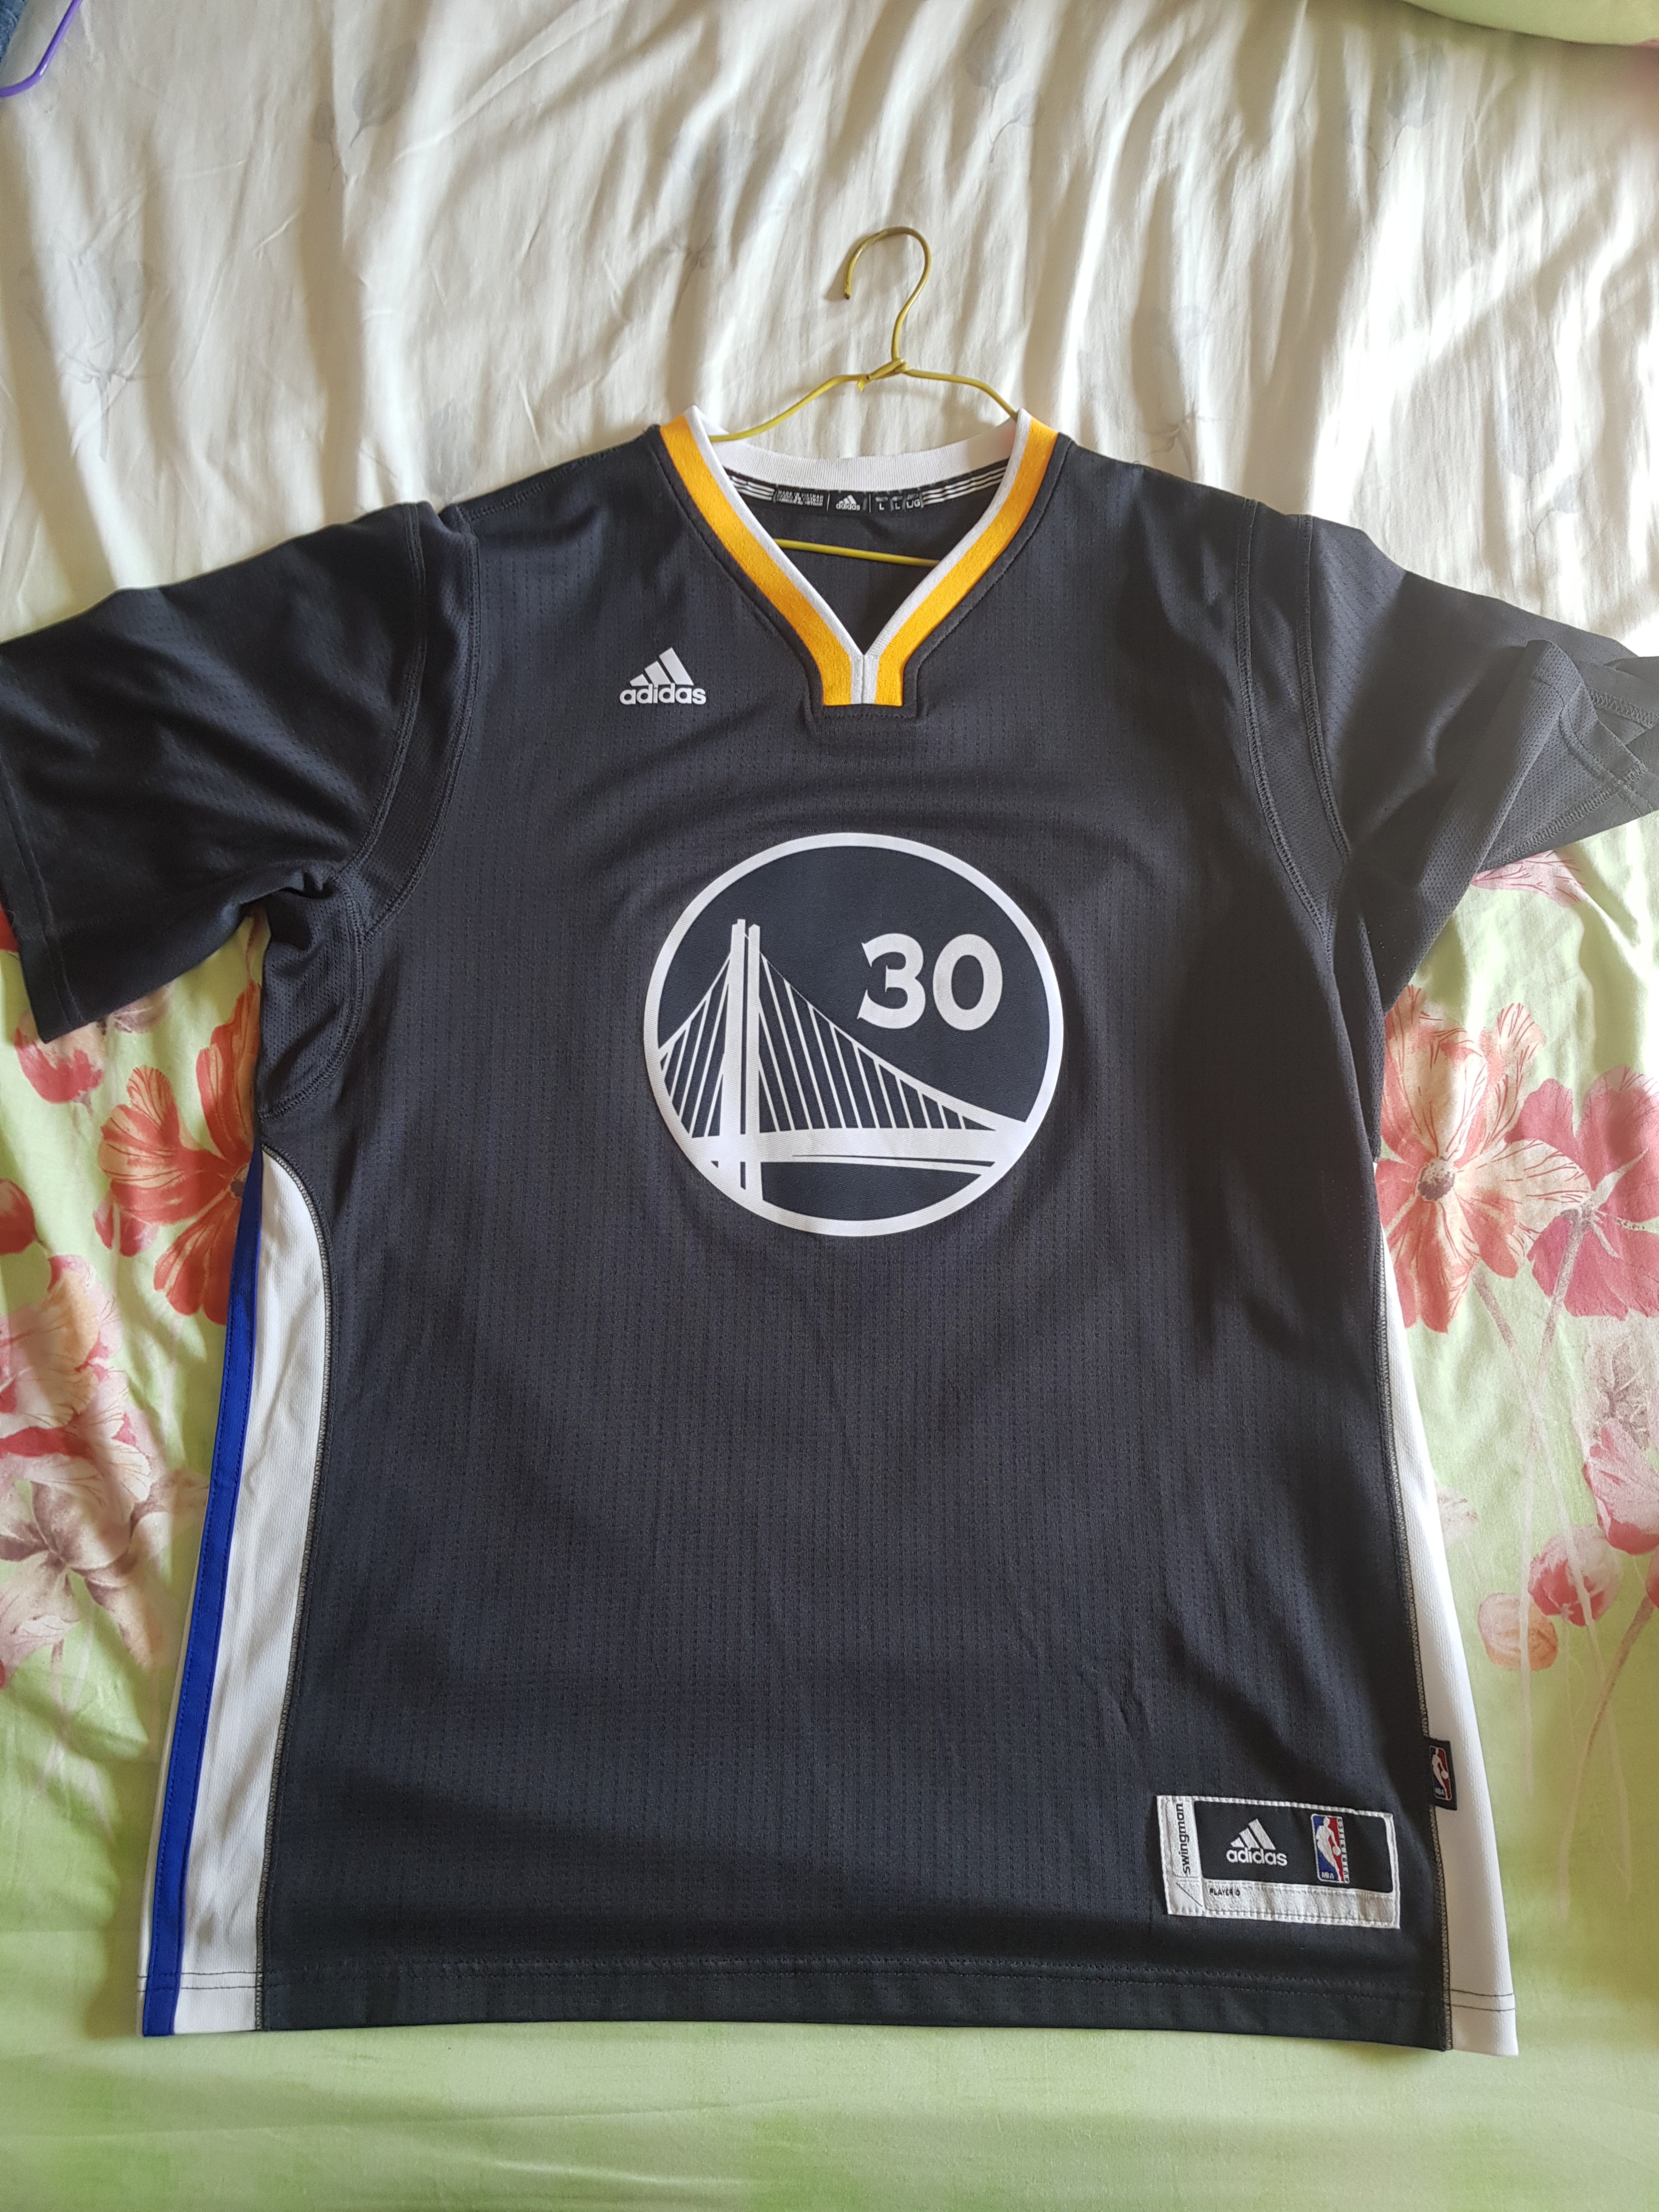 steph curry sleeved jersey